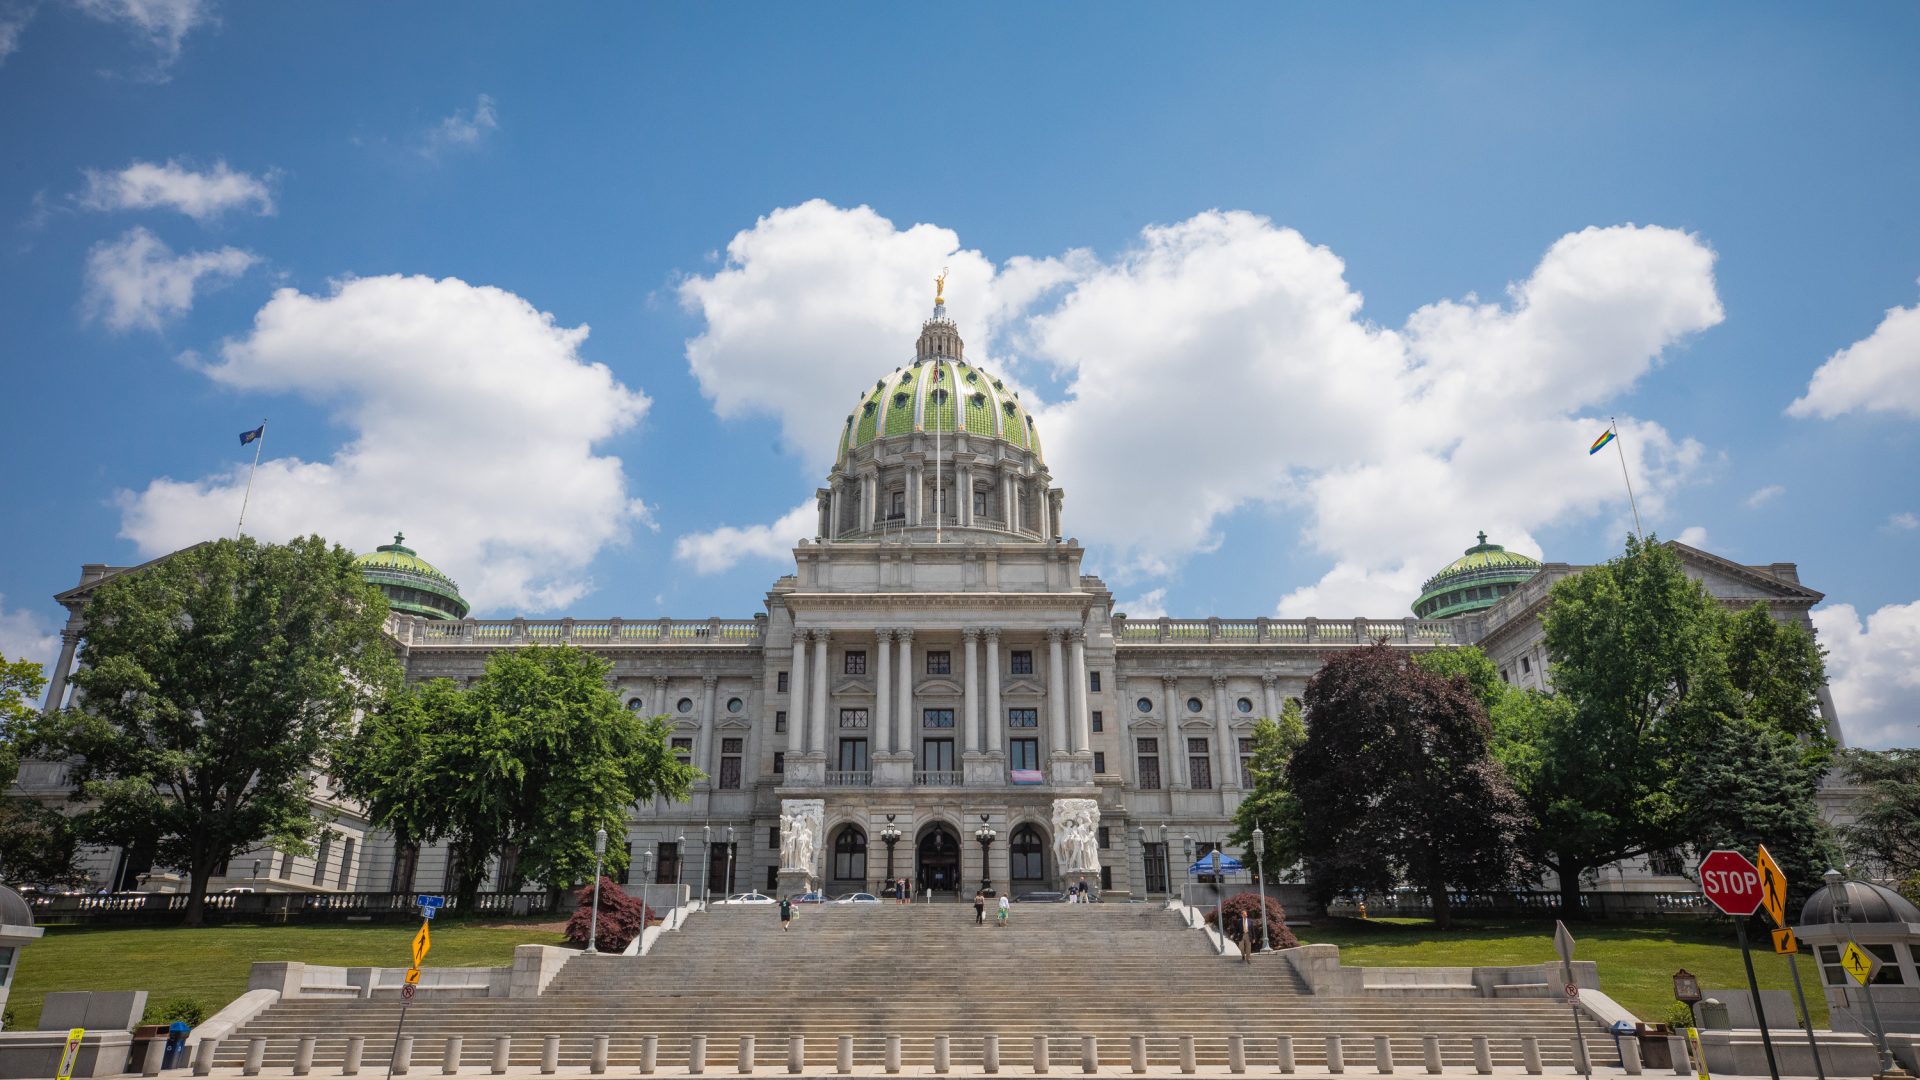 The Pennsylvania State Capitol building on Monday, June 22, 2020.